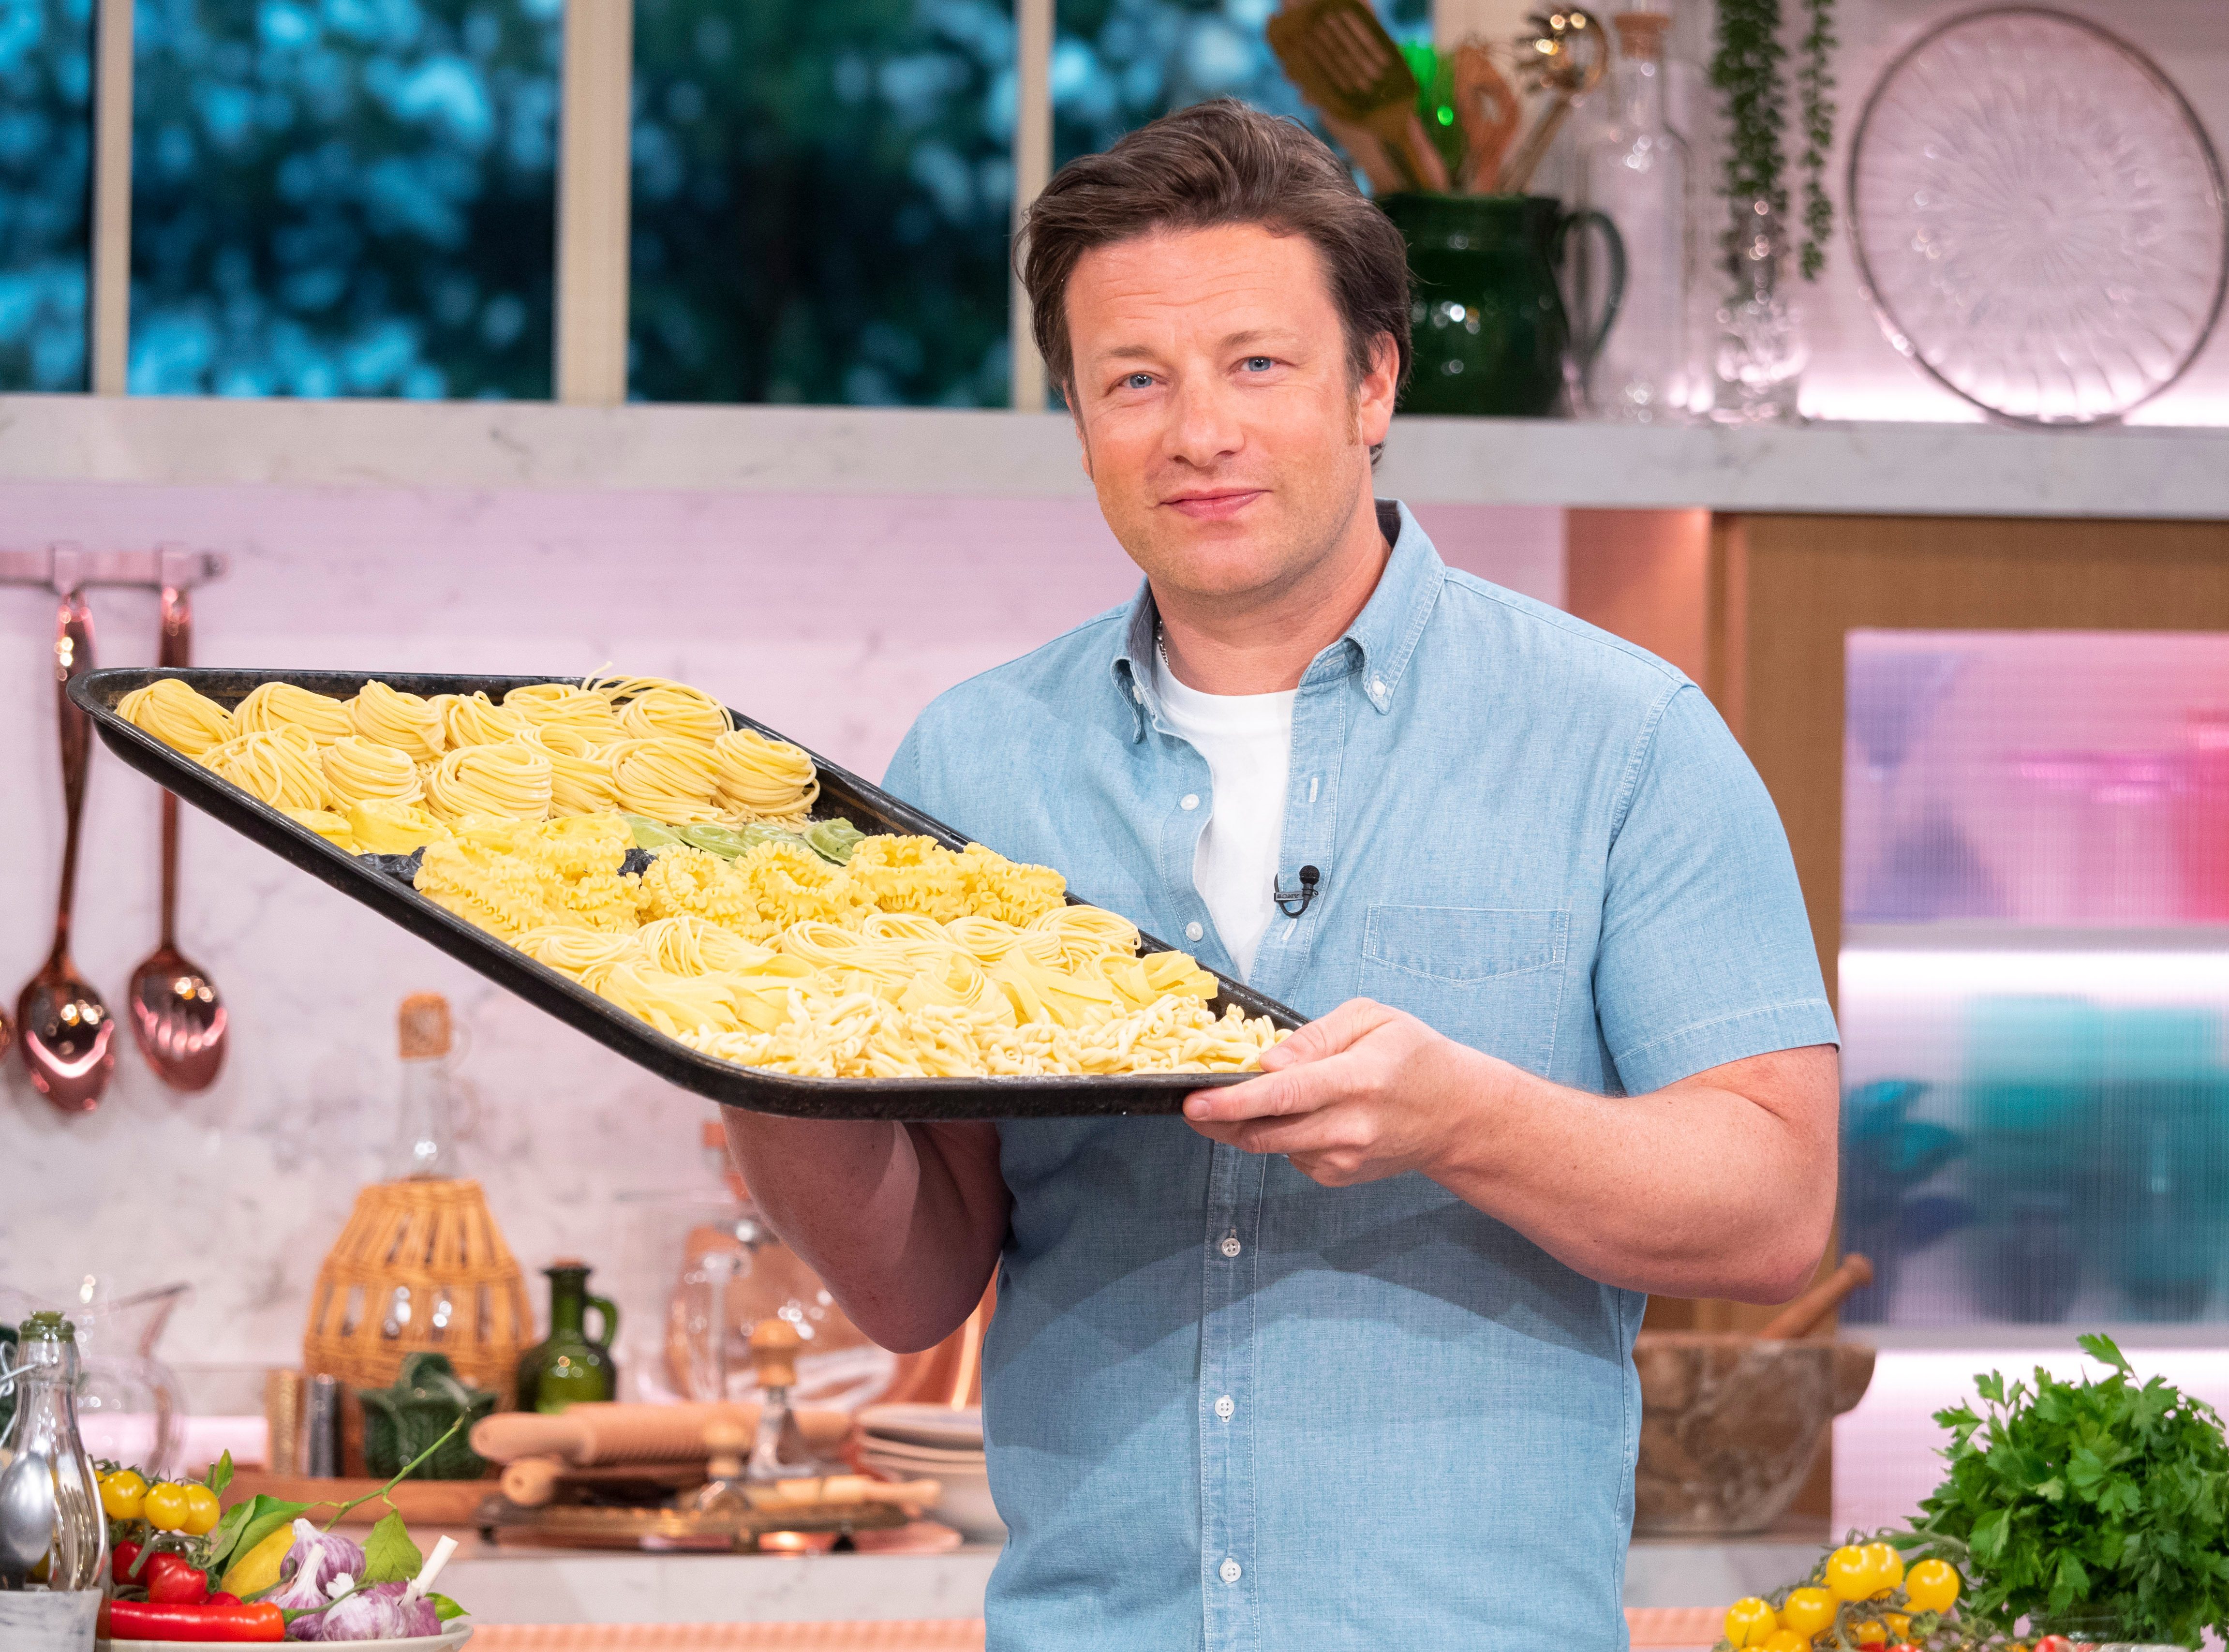 Where the Chefs Eat: Jamie Oliver shares his favourite restaurants in the  world – and some off-menu recommendations